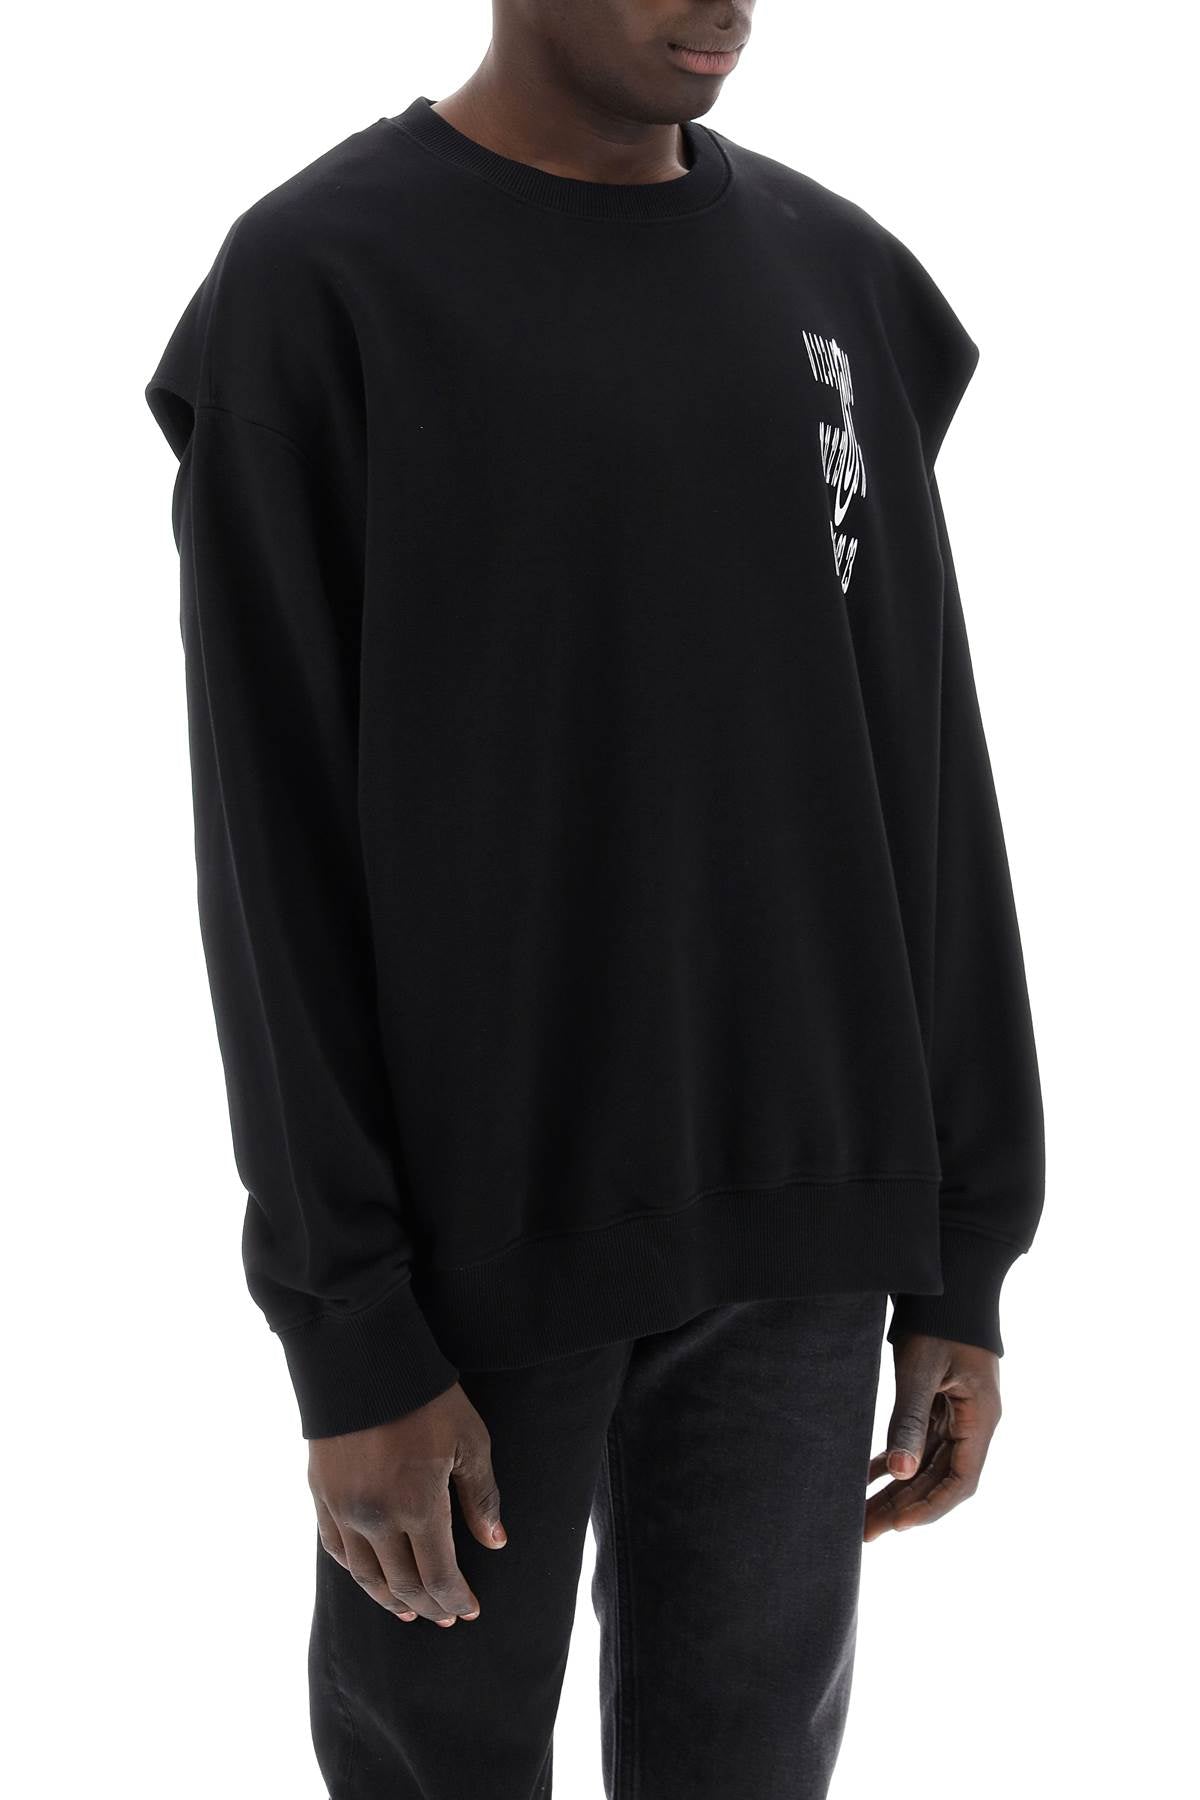 Mm6 maison margiela "sweatshirt with cut out and numeric-1